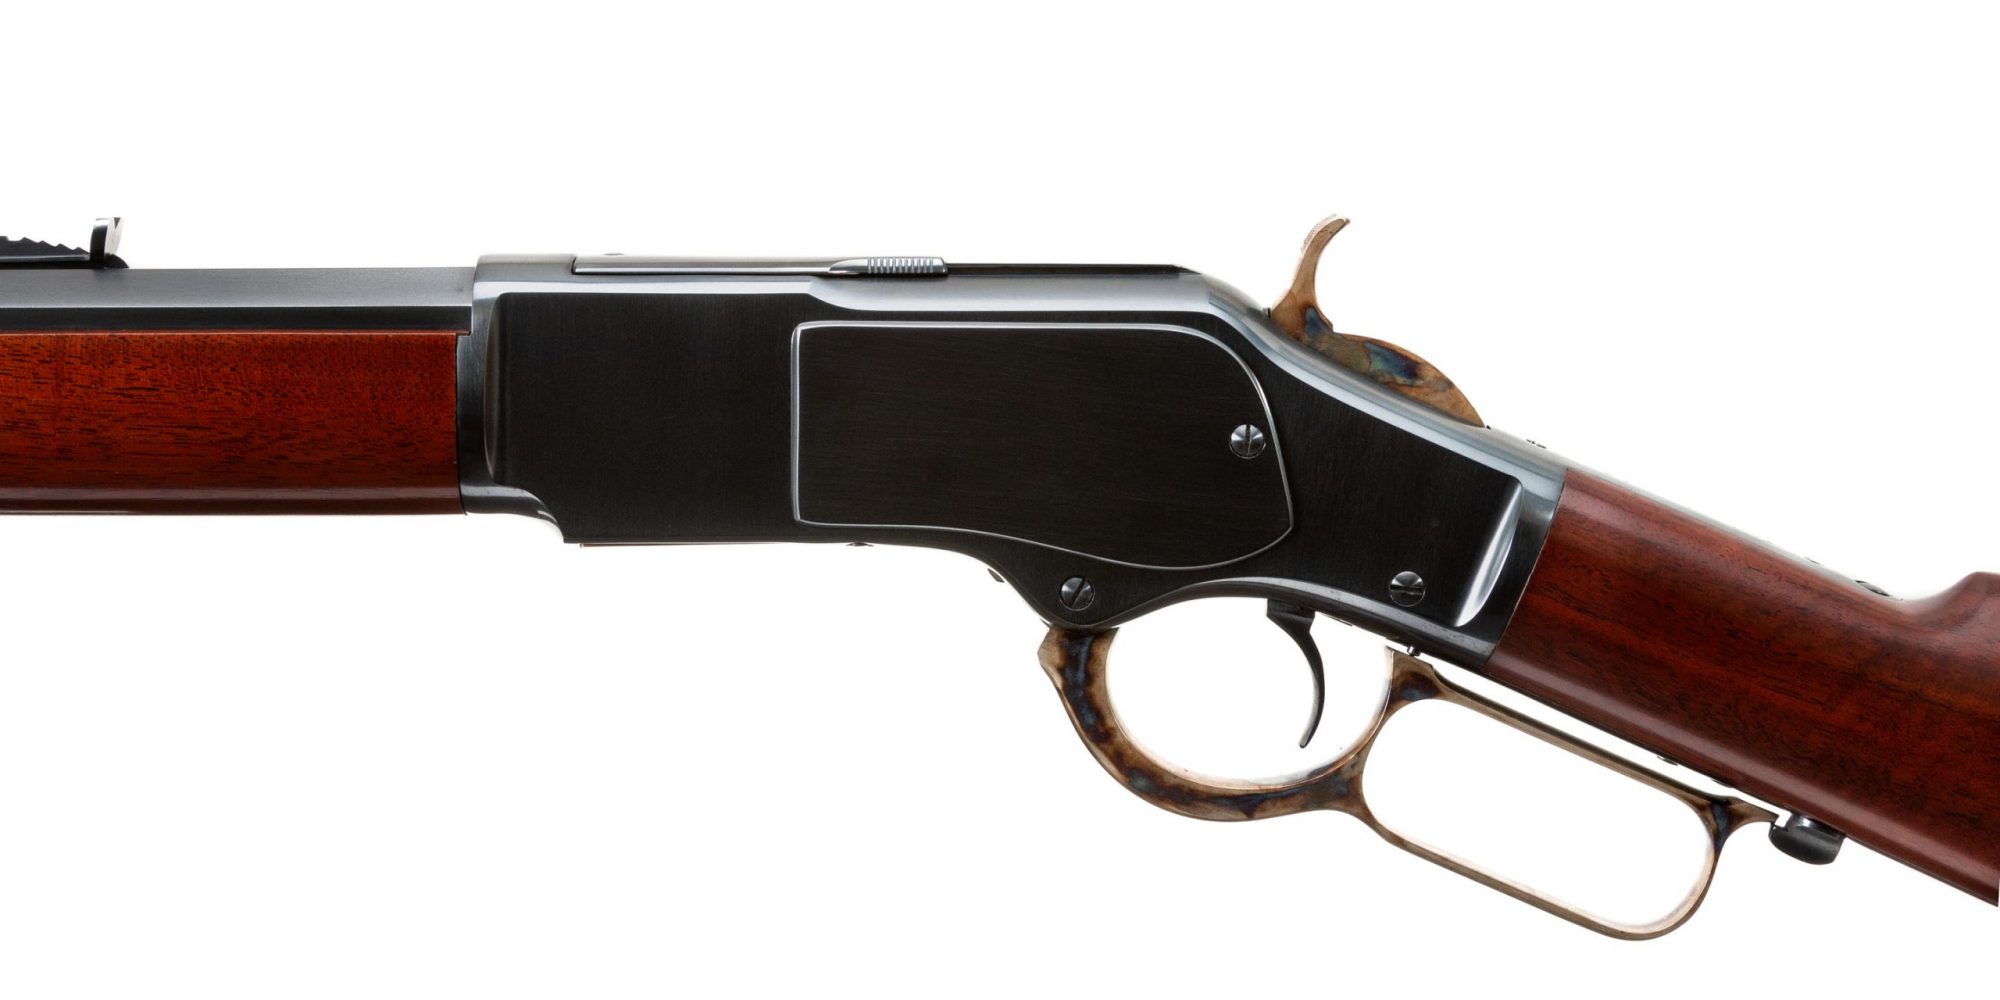 Photo of a Winchester Model 1873 from 1882, restored in 2018 and for sale by Turnbull Restoration